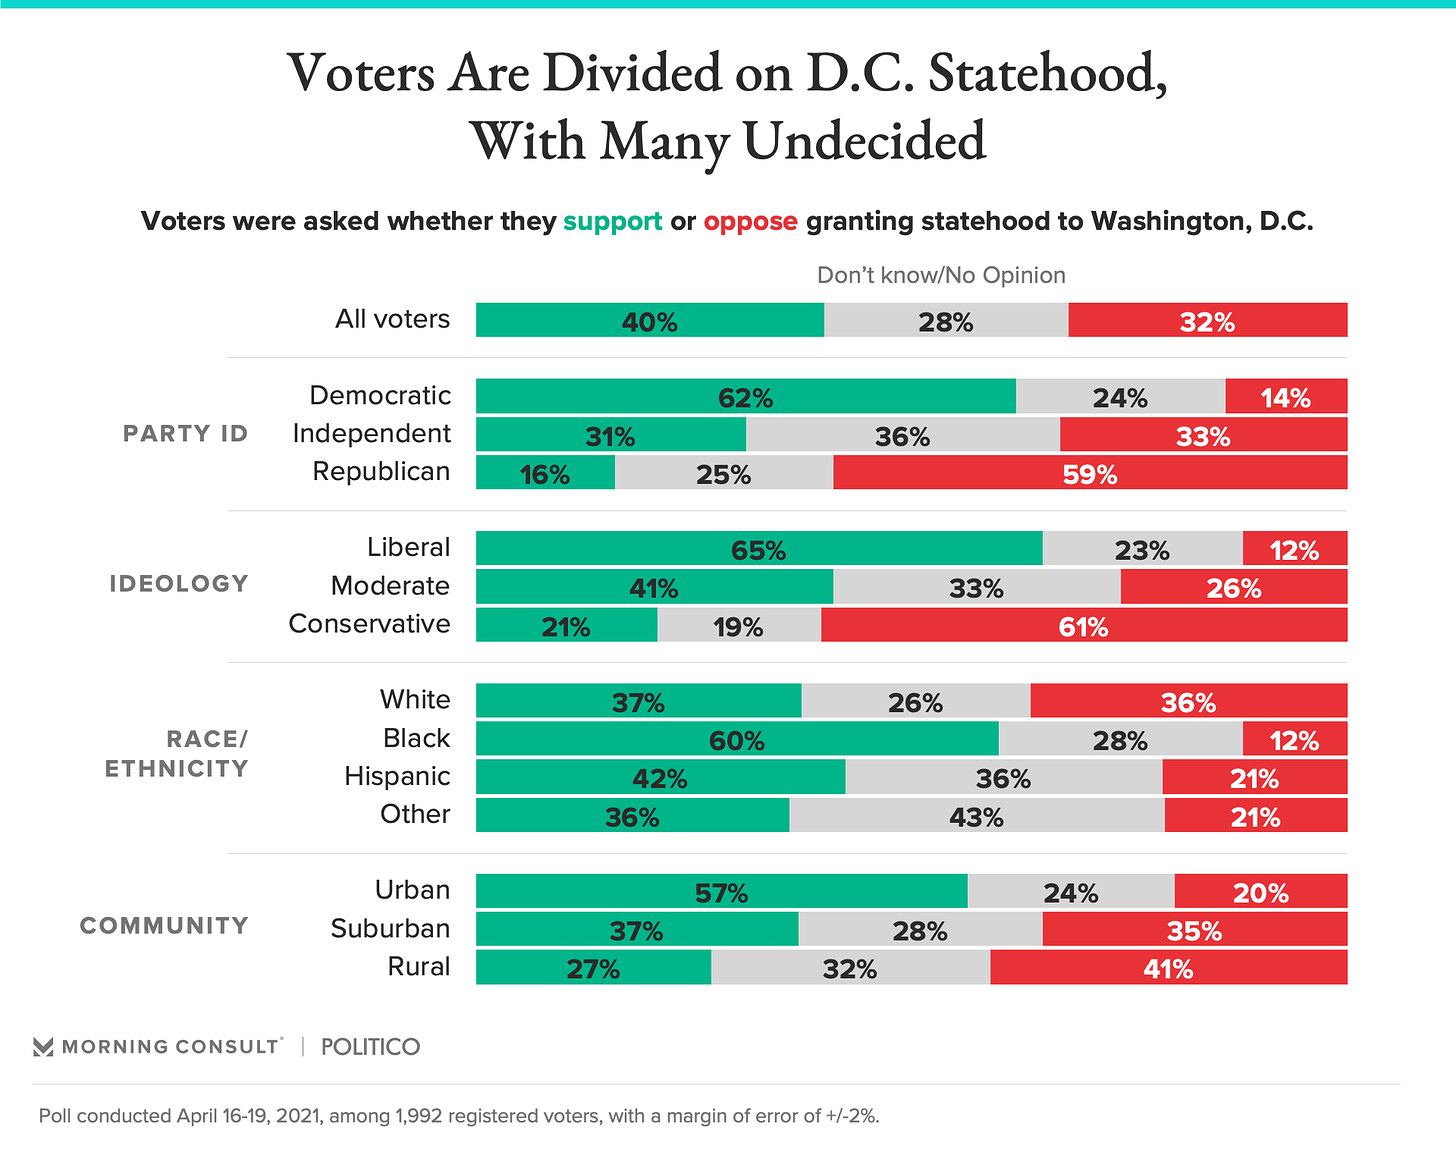 Graph showing support among different Demographics and their support for DC Statehood. A majority either supports or has no opinion while a minority, mostly republicans, oppose.